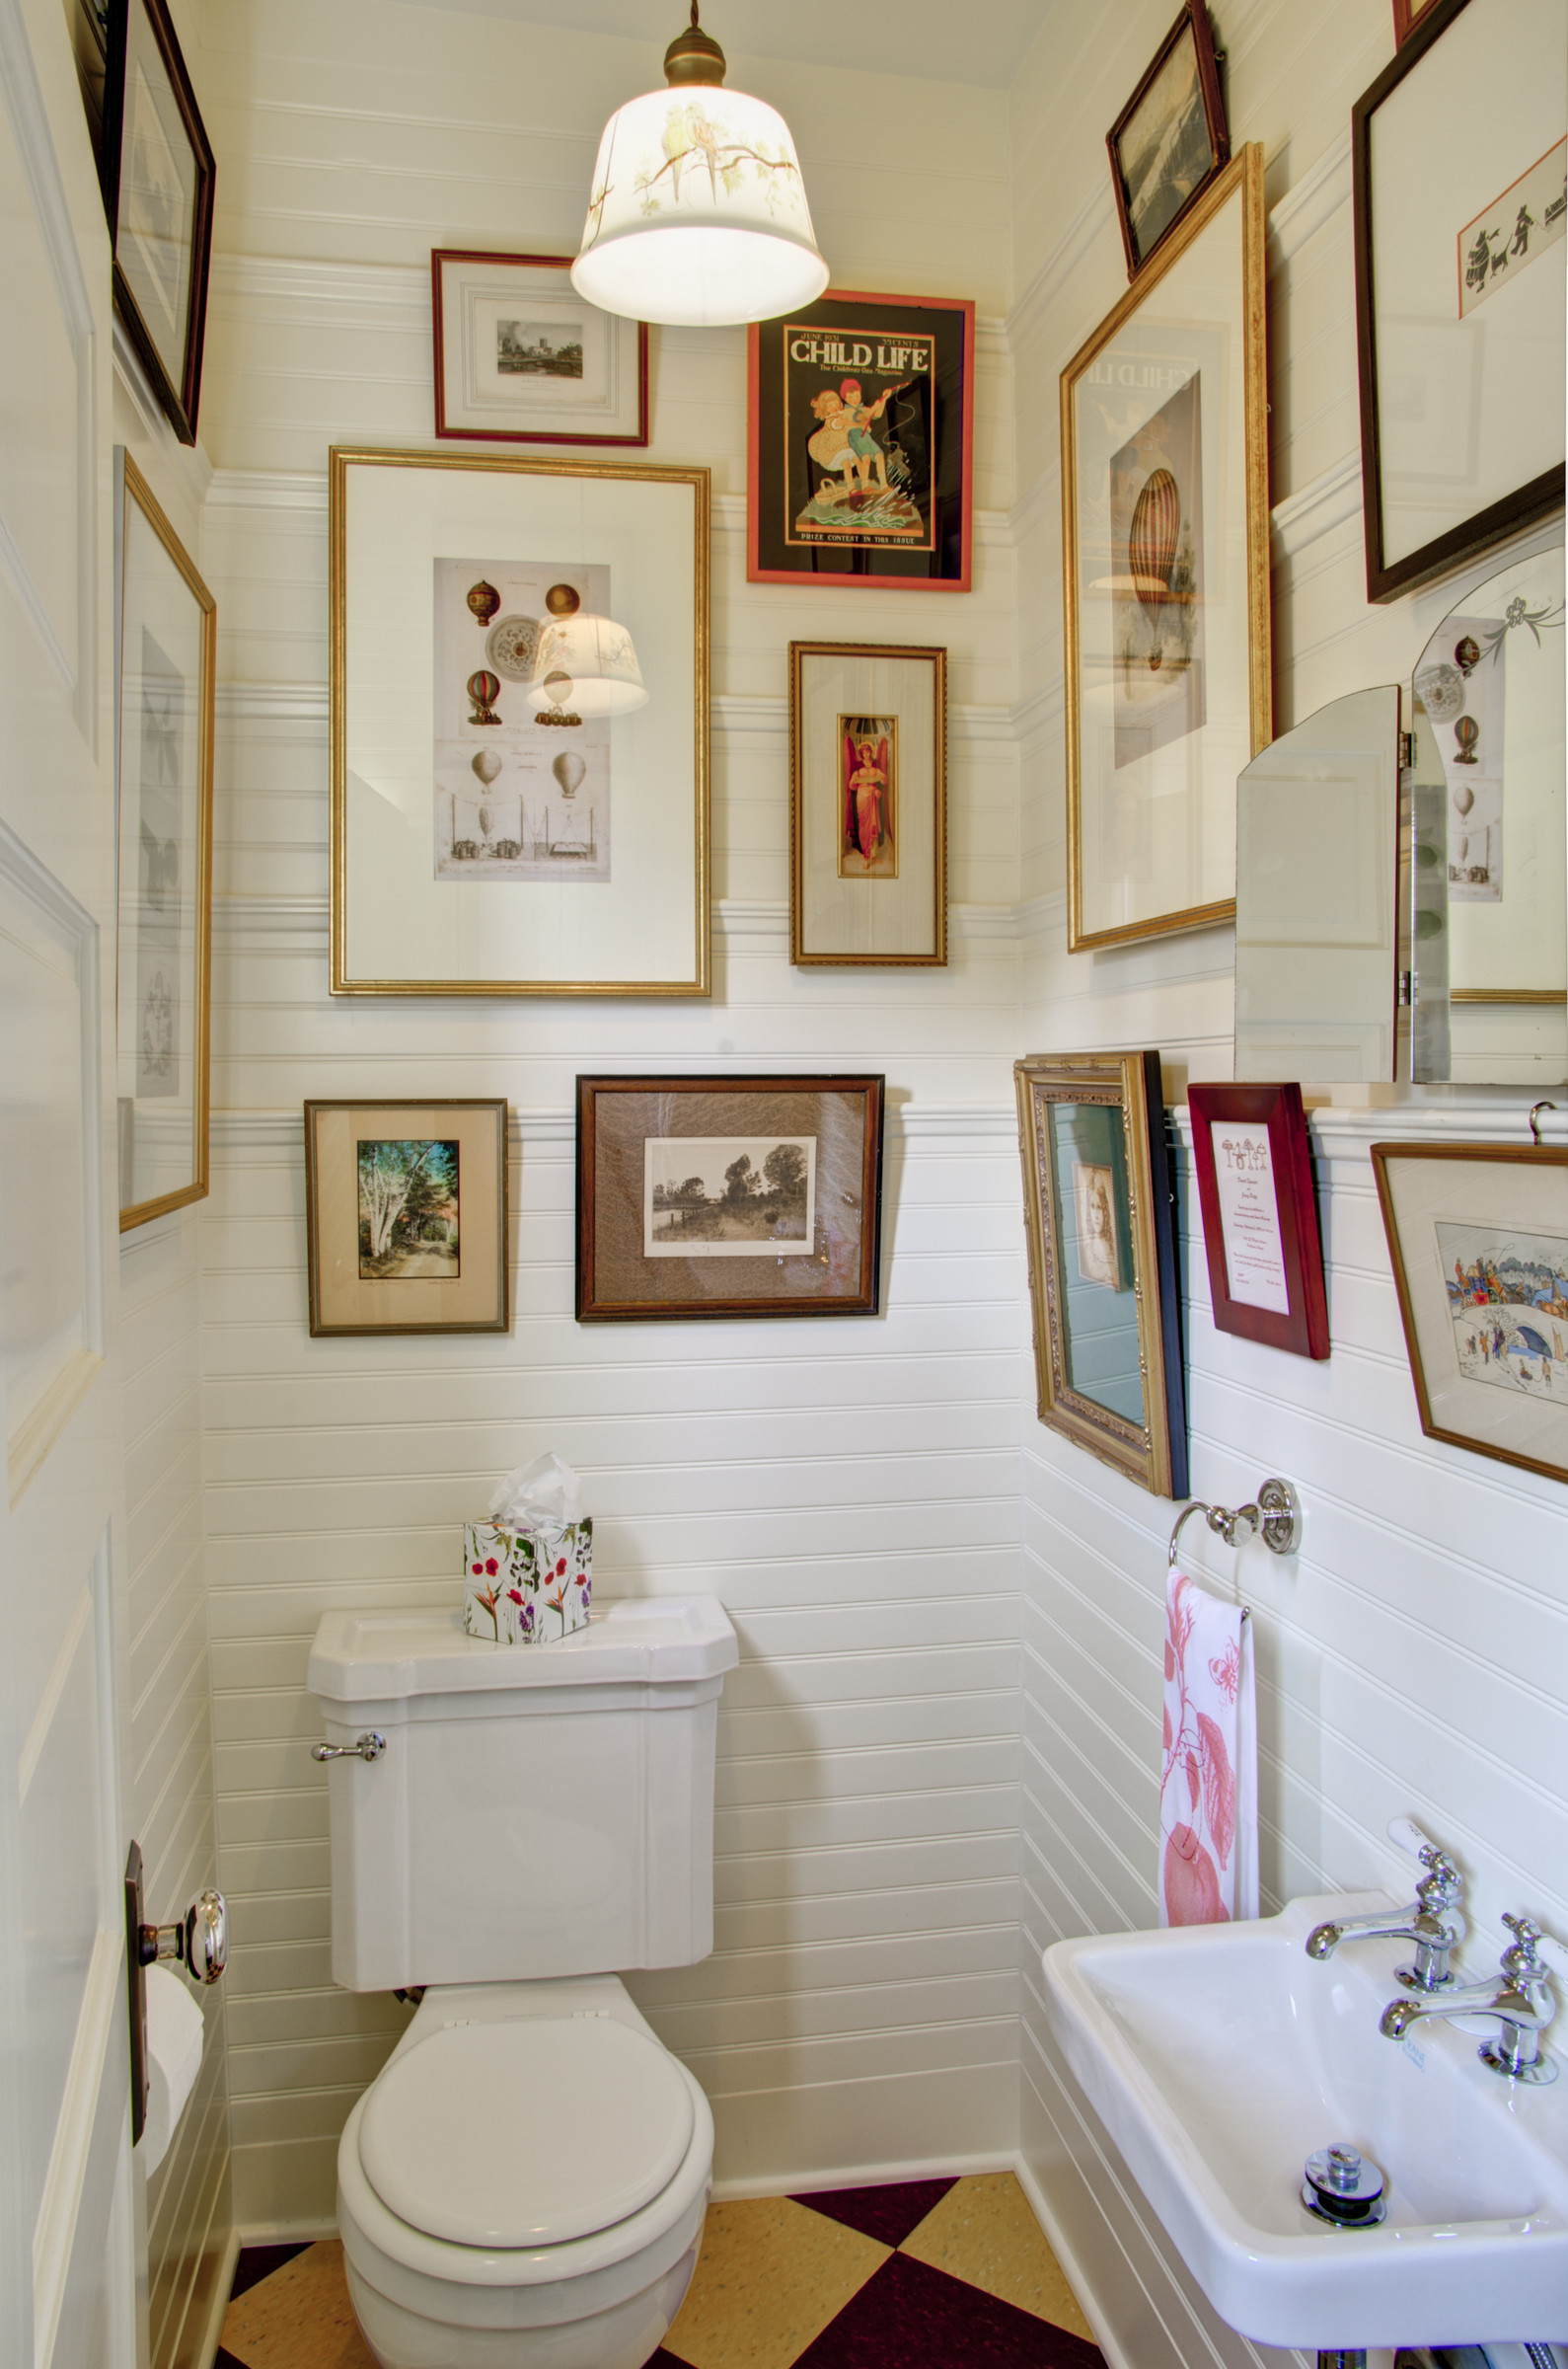 Bathroom Wall Art Sets
 Wall Decorating Ideas from Portland Seattle Home Builder